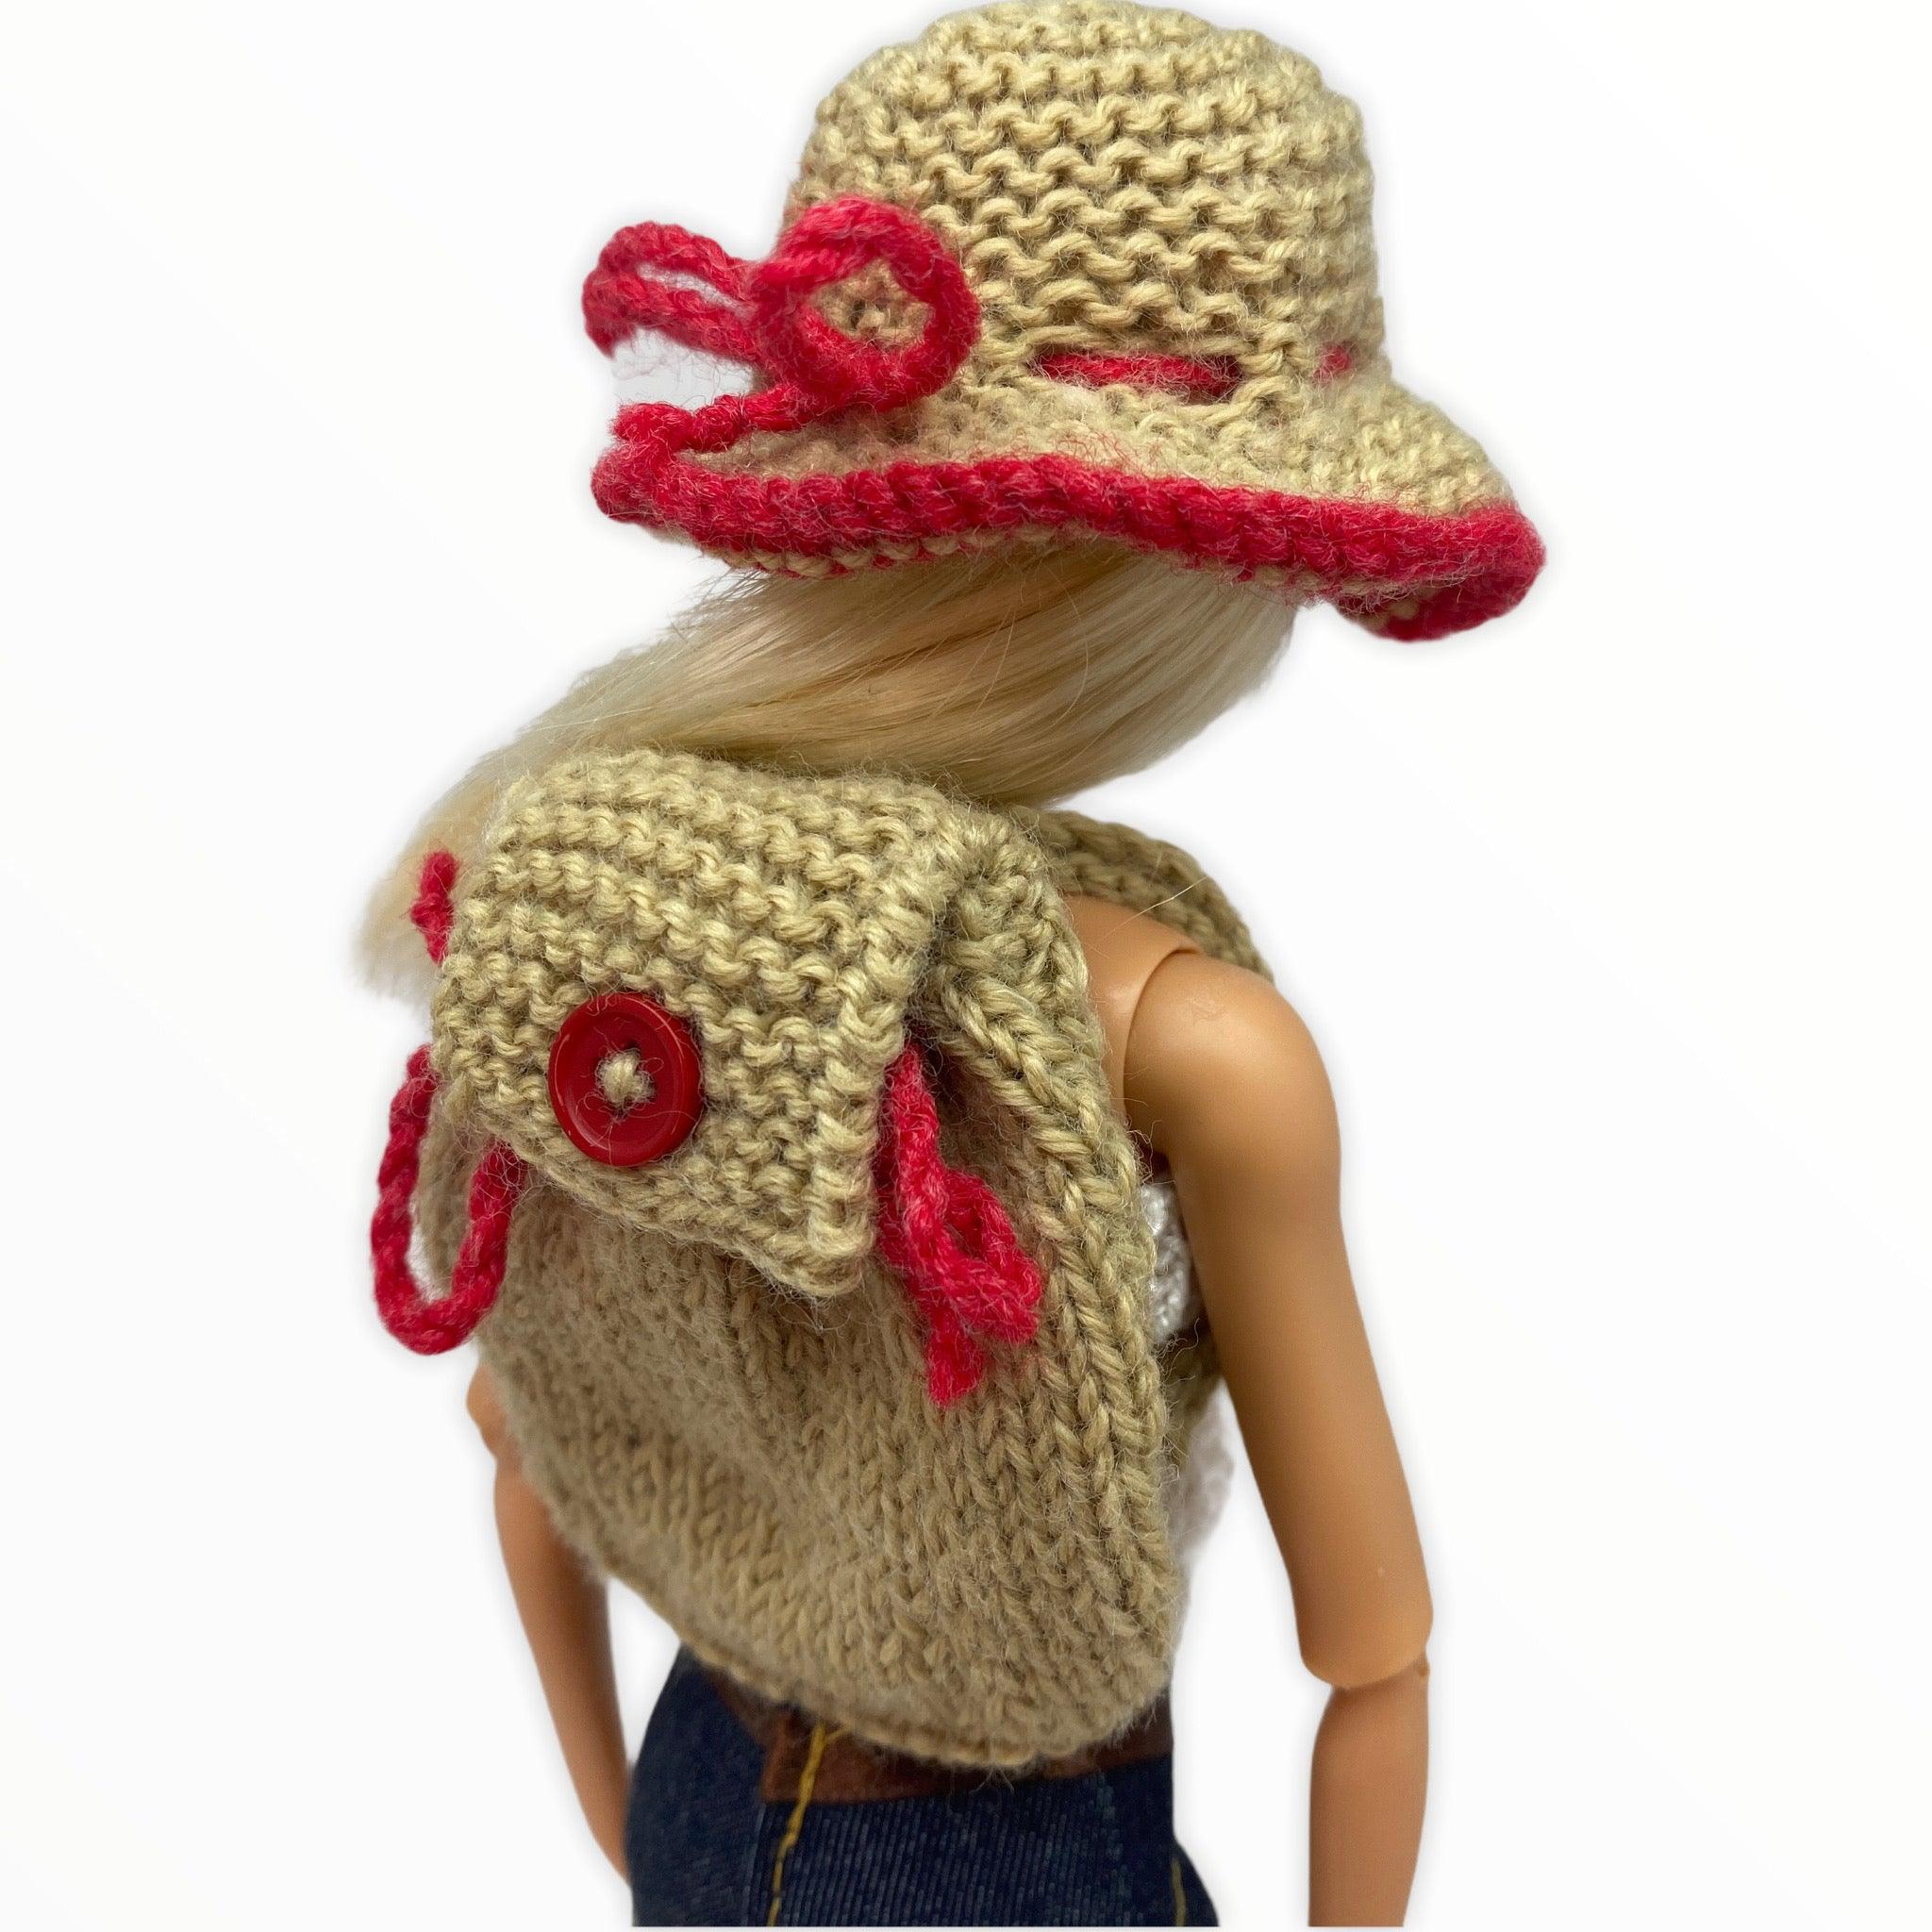 Doll Set - Hand Knitted Hat and Backpack - 2pc Set for 29cm/11.5" Fashion Doll Meraki Handmade